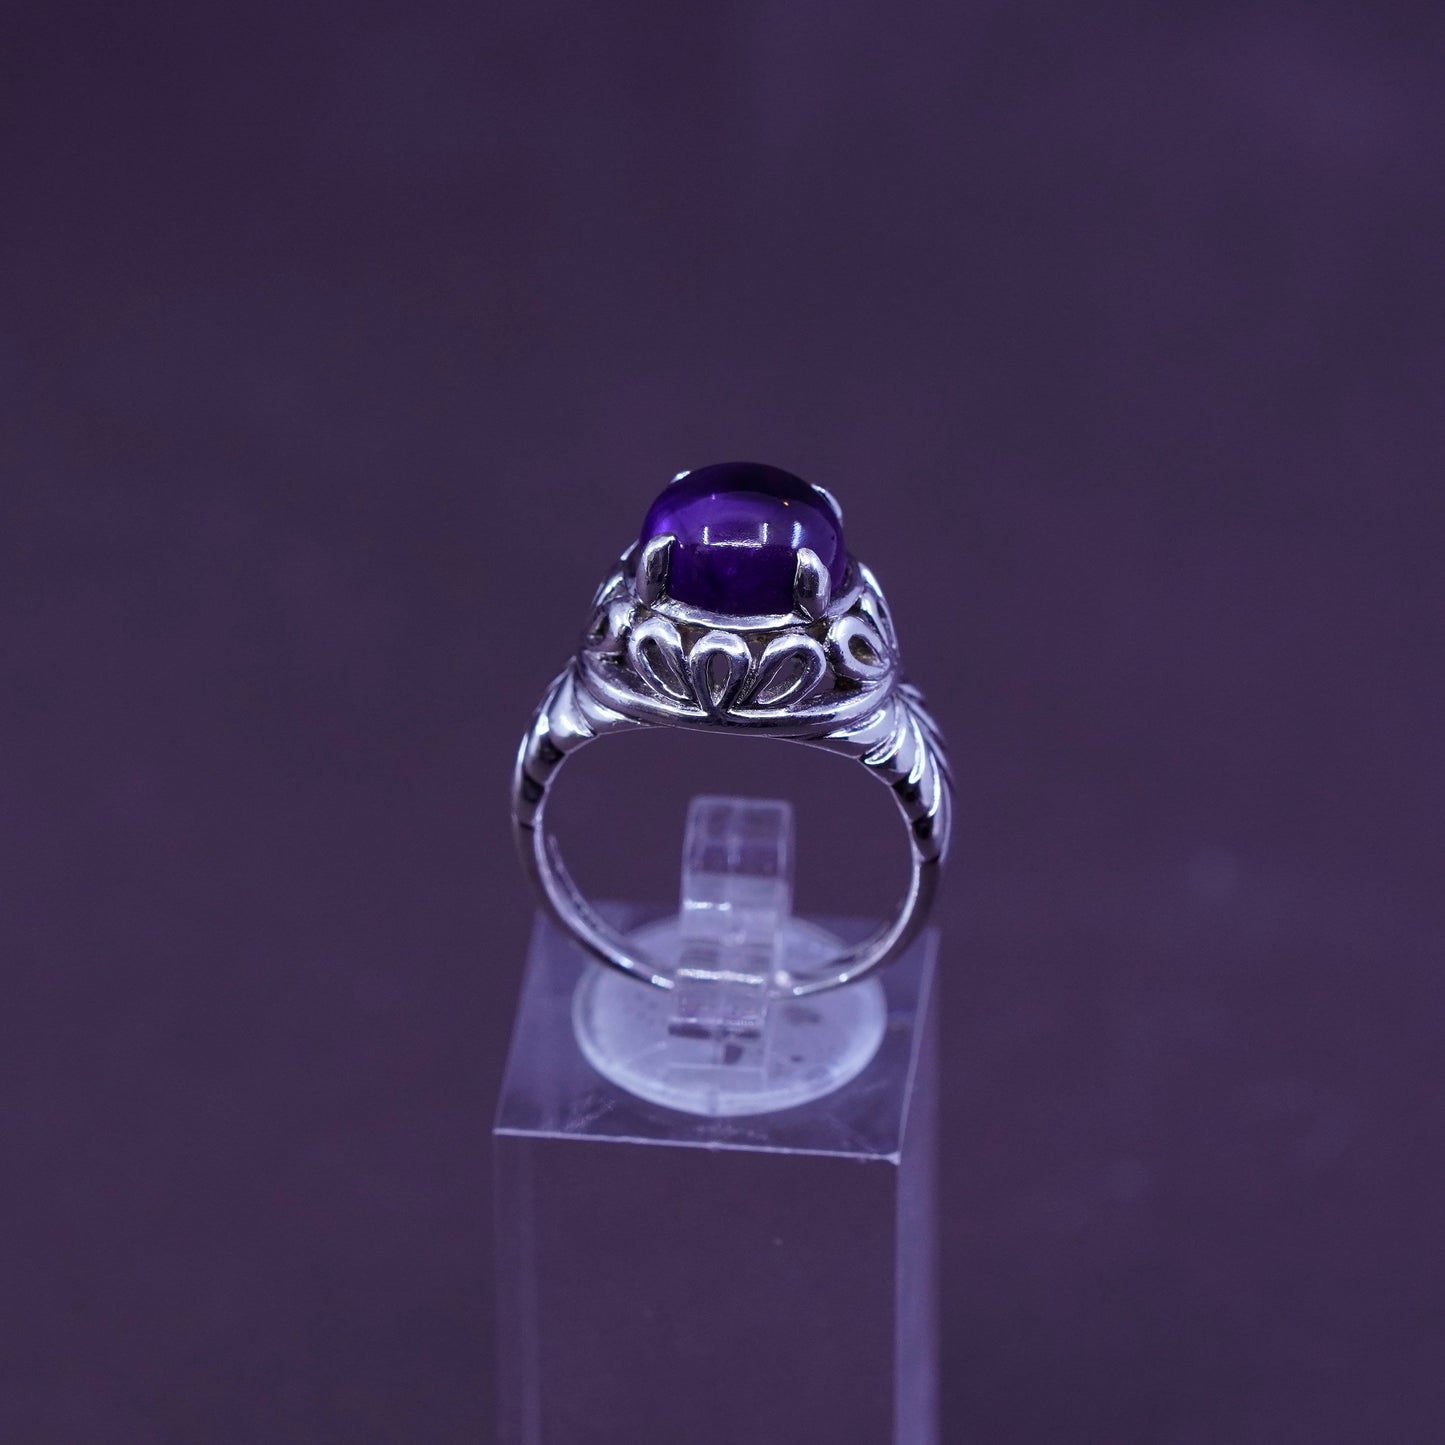 Size 8.25, vintage SLC filigree Sterling 925 silver handmade ring with amethyst